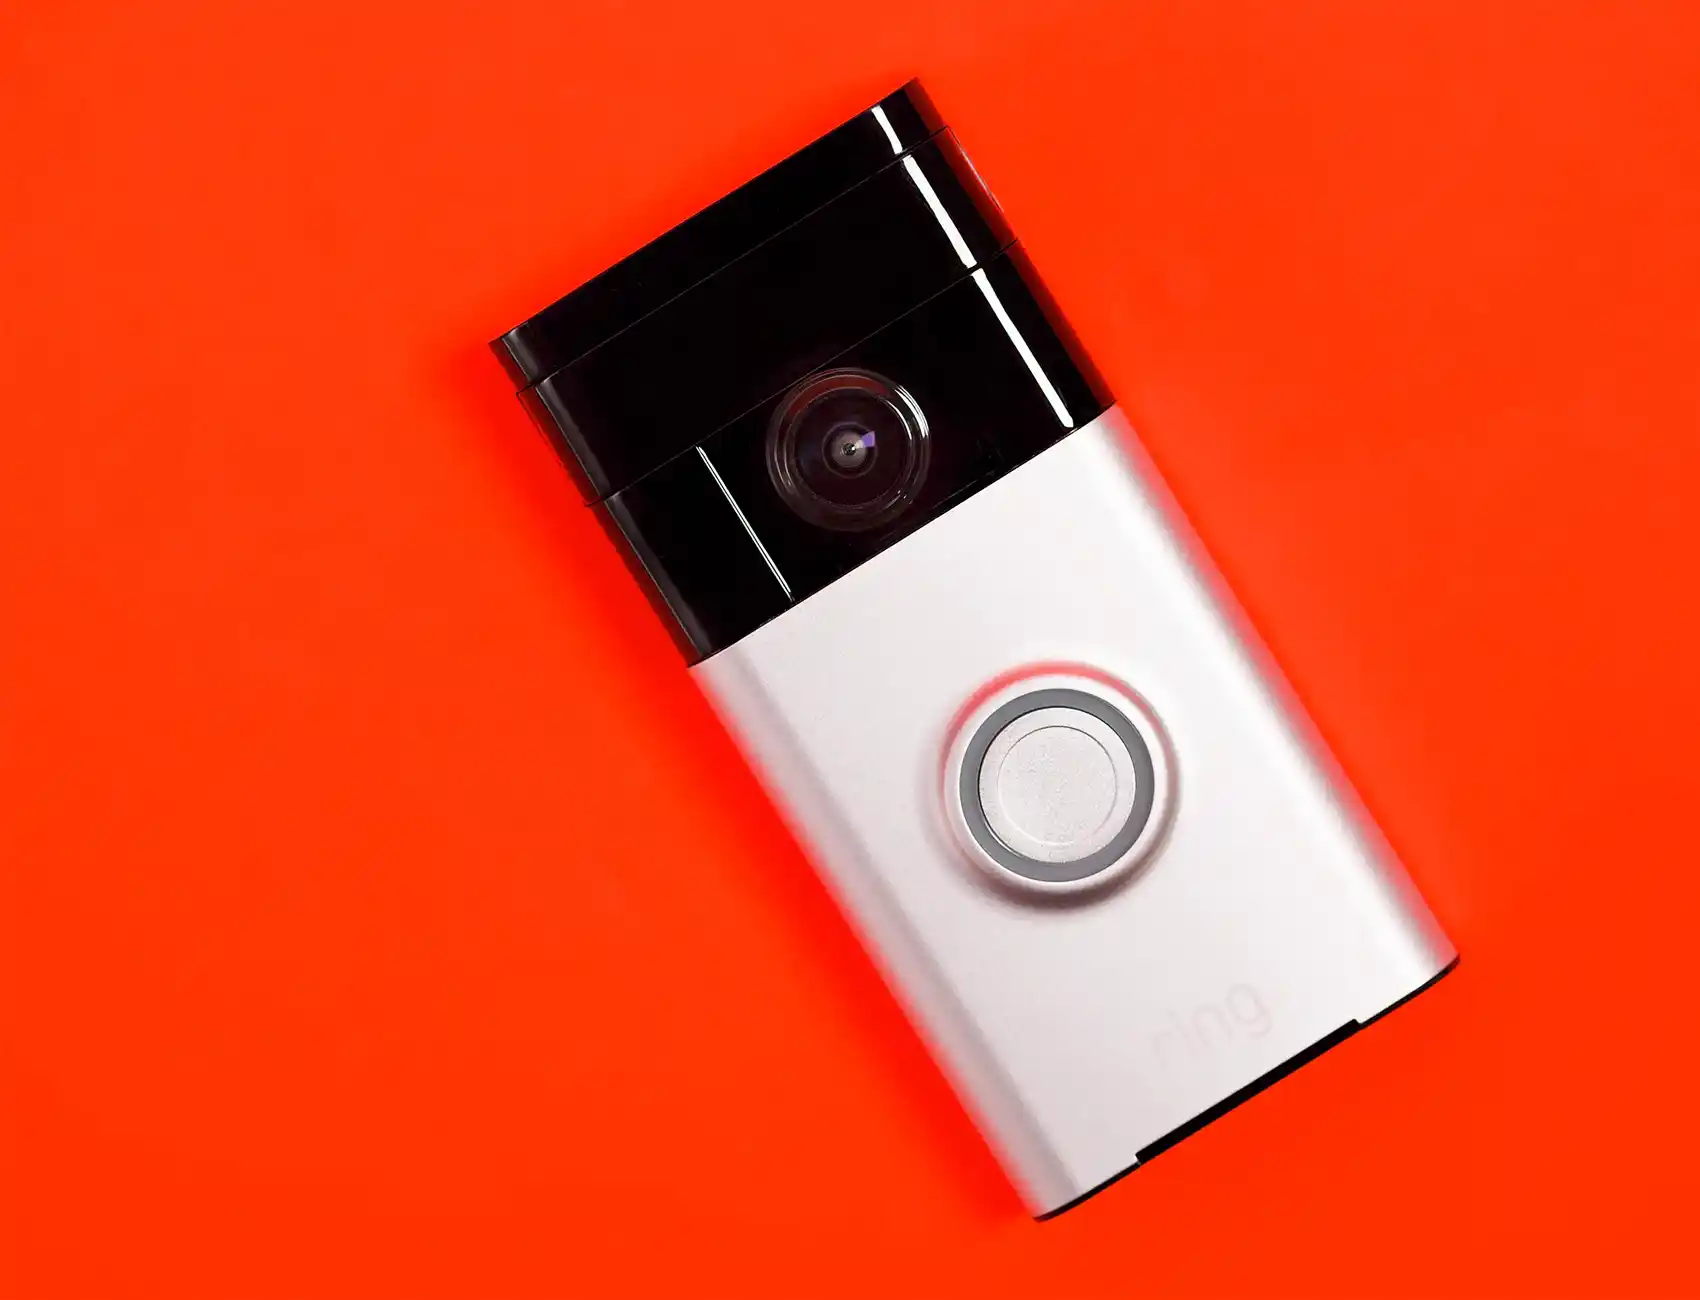 How To Install A Video Doorbell Without An Existing Doorbell